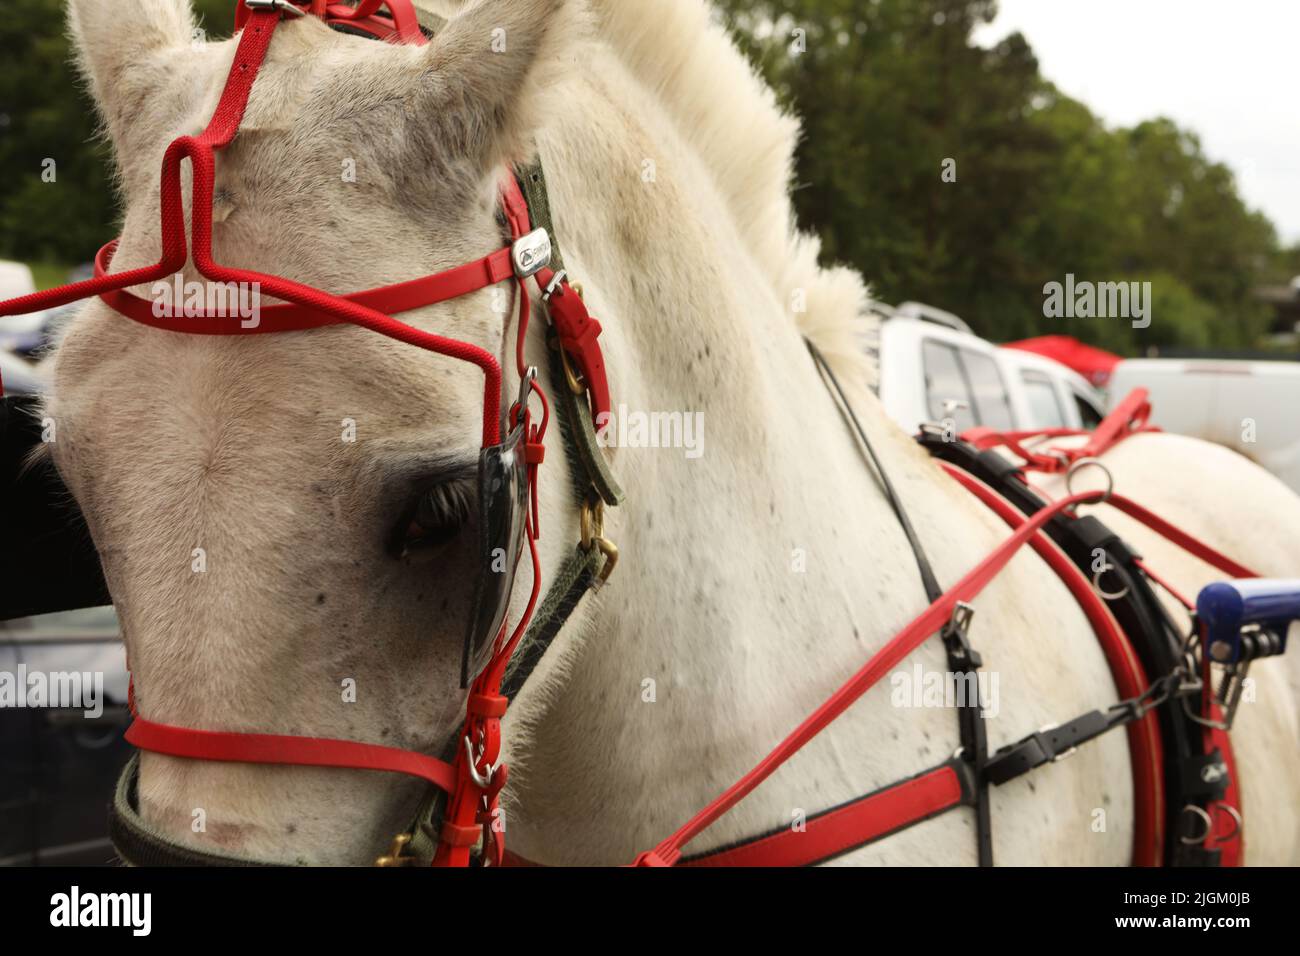 A grey horse wearing a red harness, pulling a trap. Appleby Horse Fair, Appleby in Westmorland, Cumbria, England, United Kingdom Stock Photo